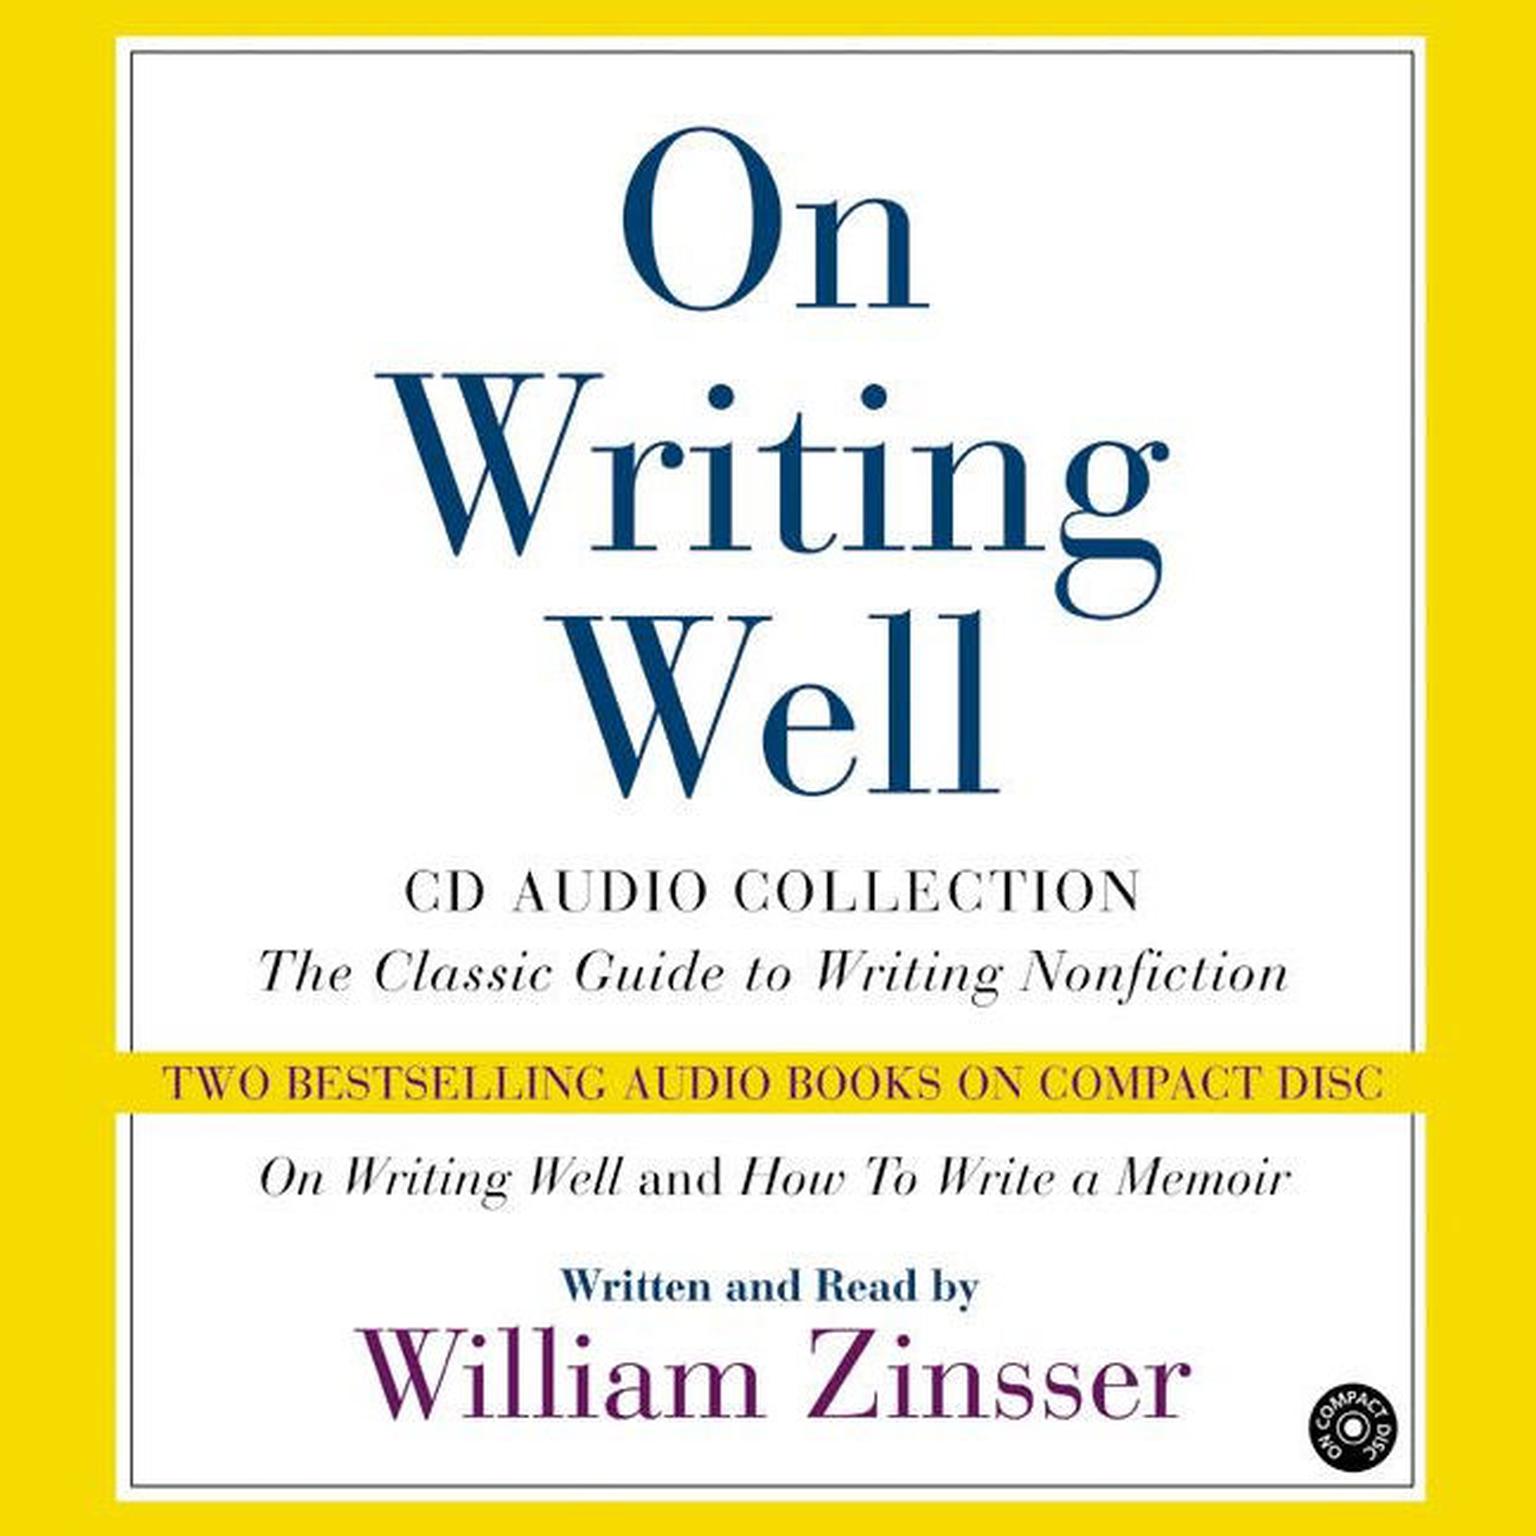 On Writing Well Audio Collection (Abridged): Audio Collection Audiobook, by William Zinsser